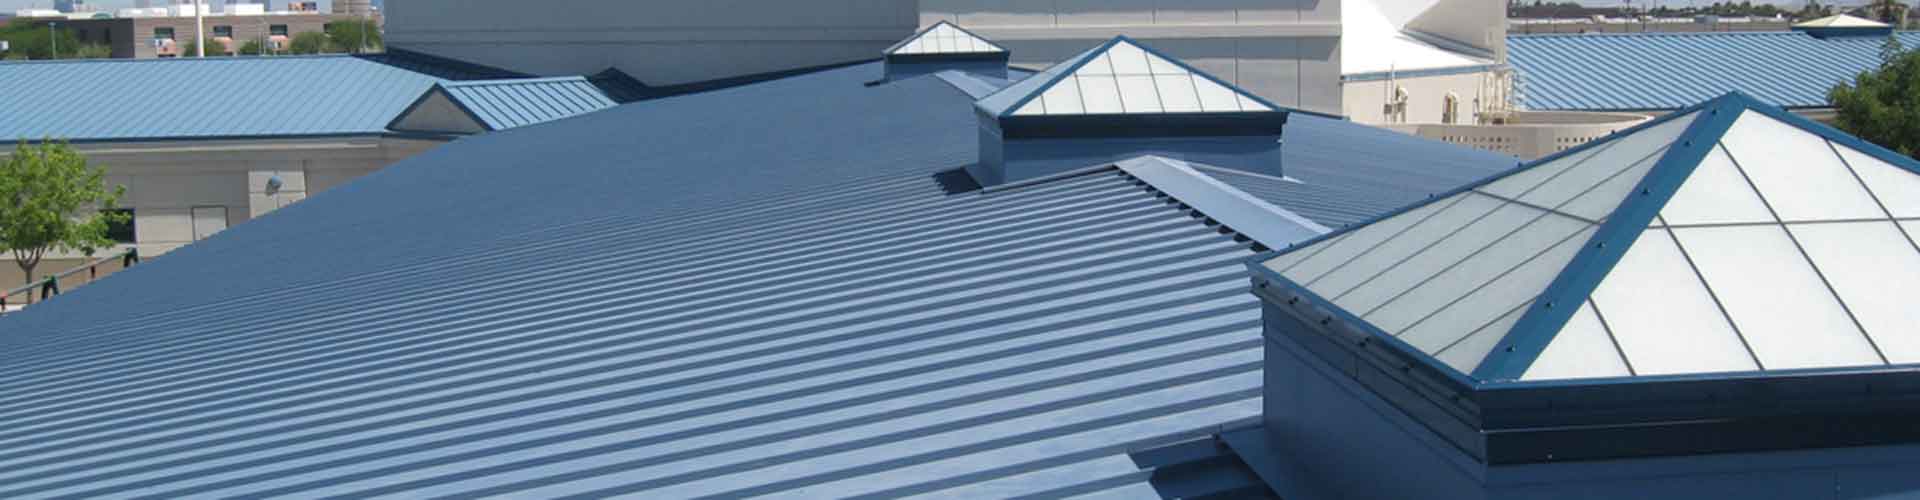 commercial roof example from Downs Roofing